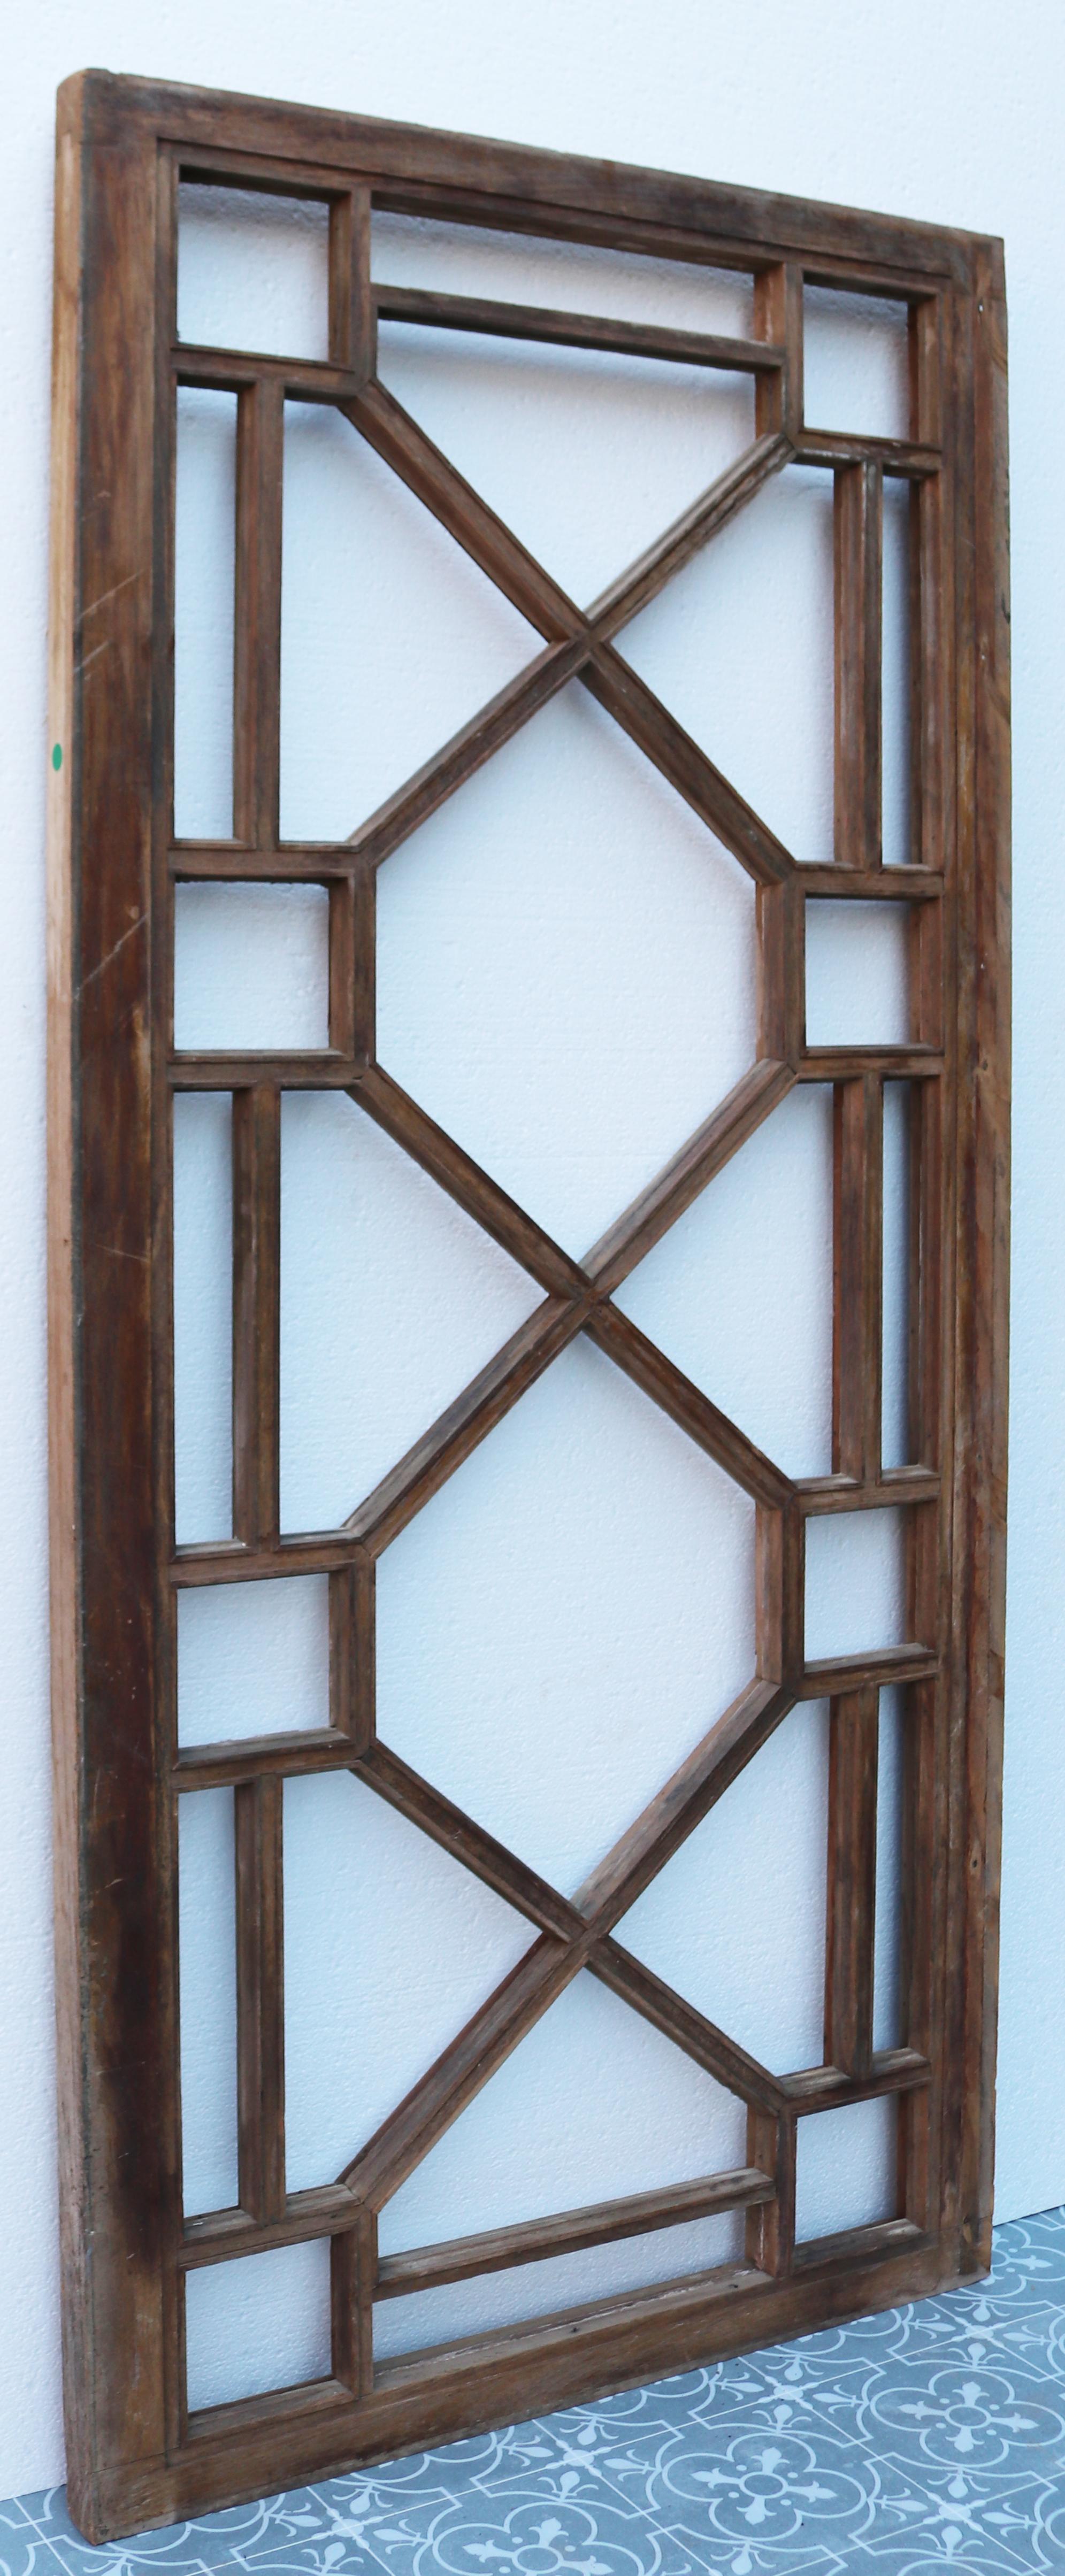 A reclaimed door or window with astral glazing, made from teak.